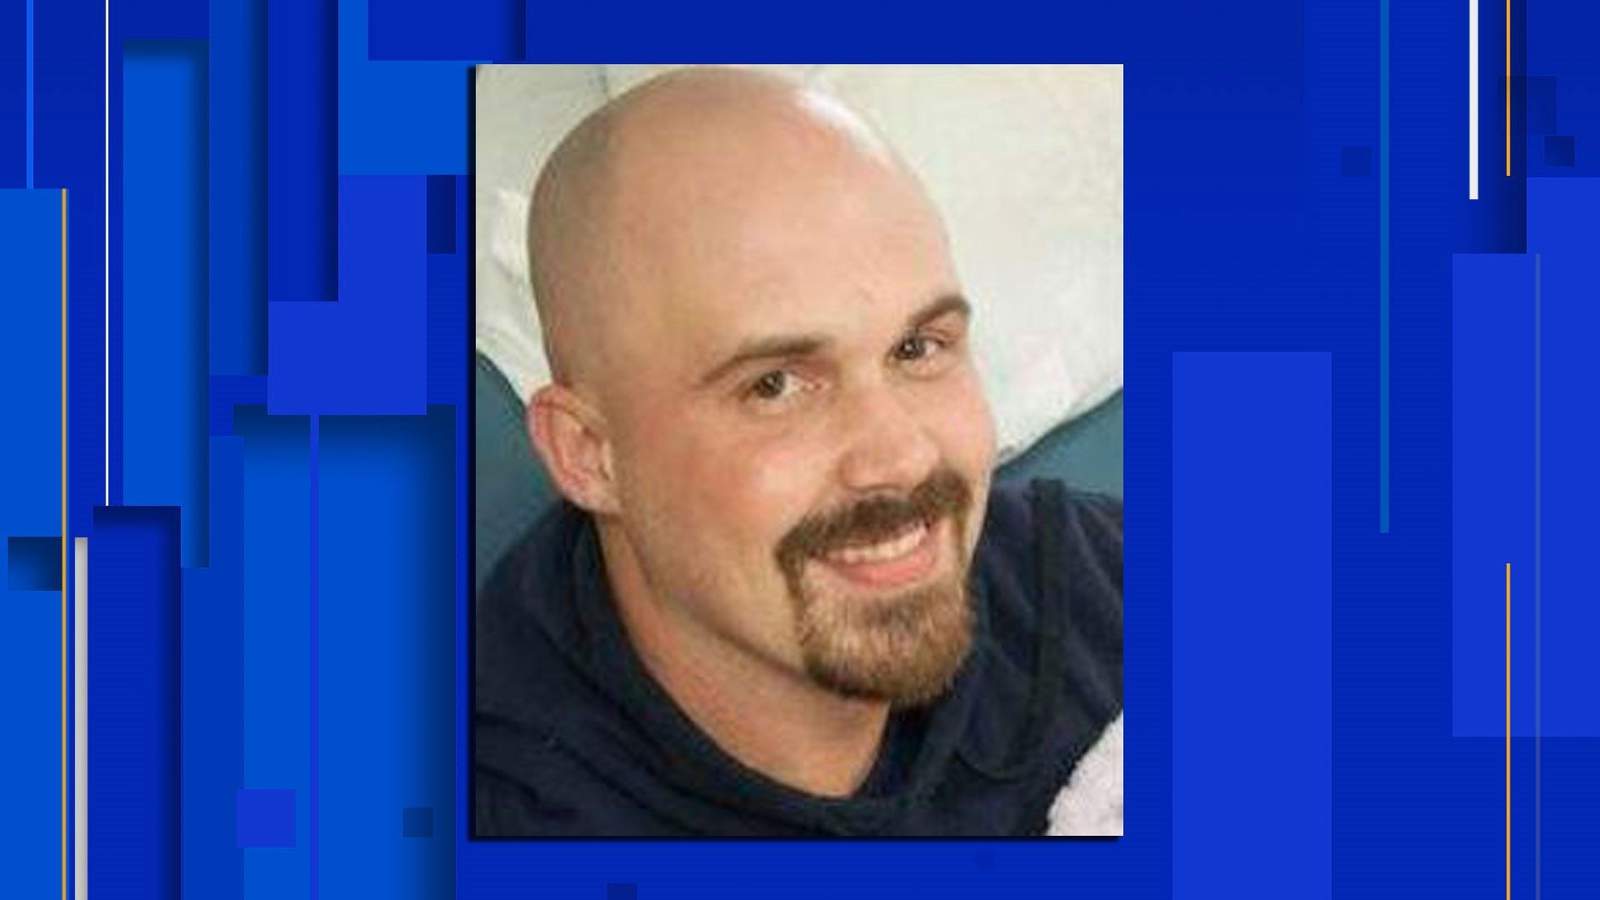 Human remains found in Danville identified as missing Pittsylvania County man